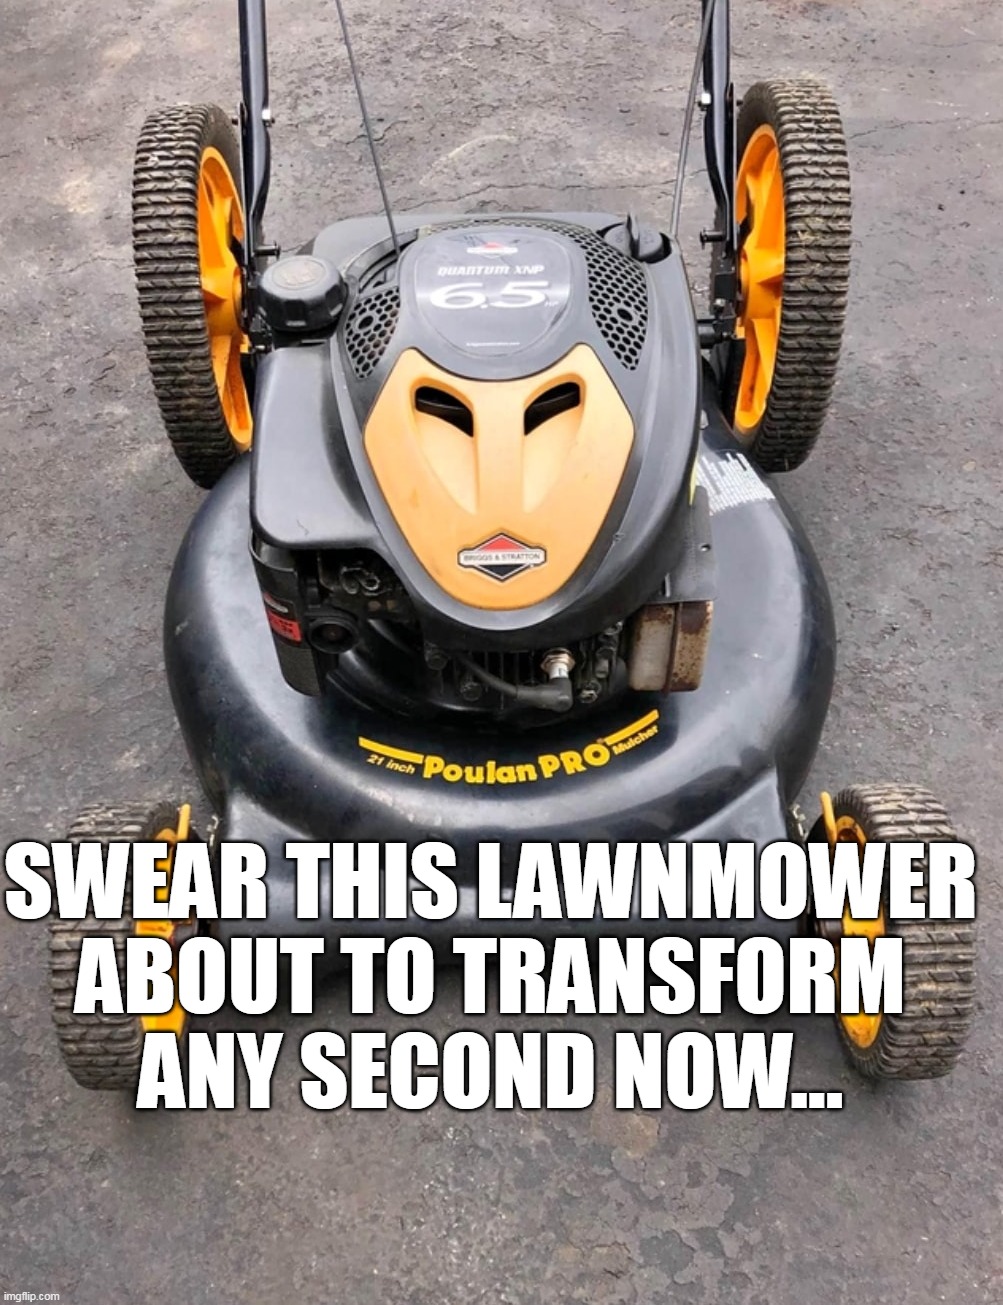 Careful What You Buy This Spring | SWEAR THIS LAWNMOWER ABOUT TO TRANSFORM ANY SECOND NOW... | image tagged in meme,memes,humor | made w/ Imgflip meme maker